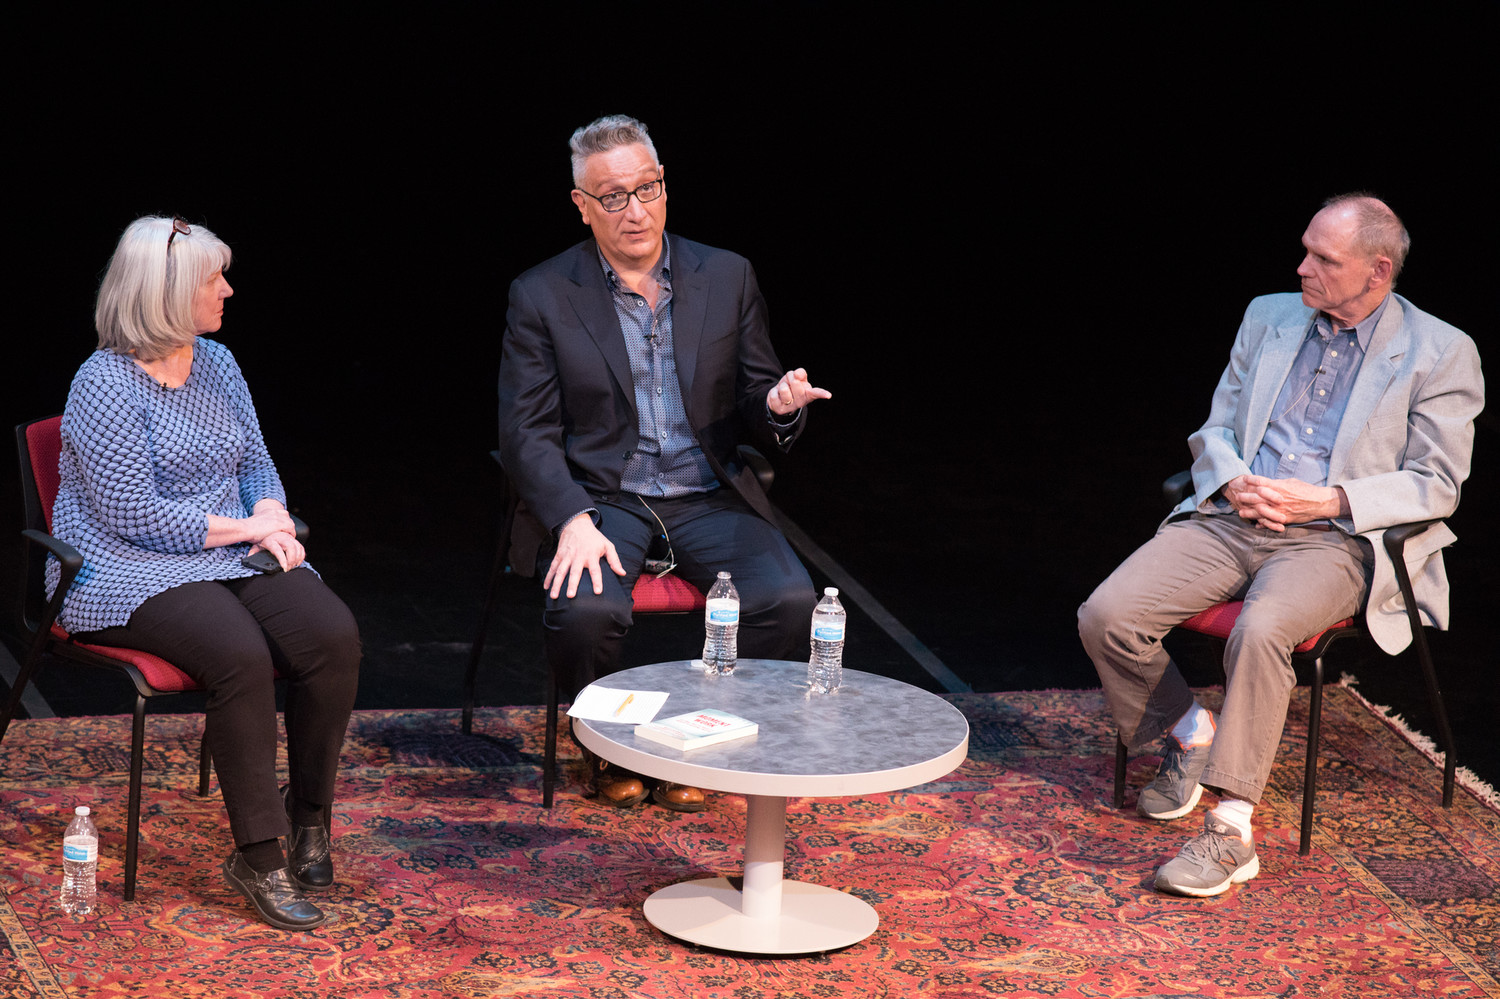 Moisés Kaufman, award-winning playwright, director and founder of Tectonic Theater Project, on stage with Drama Professor Colleen Kelly and UVA playwright Doug Grissom during his mini-residency supported by the UVA Arts Fund for Artistic Excellence.